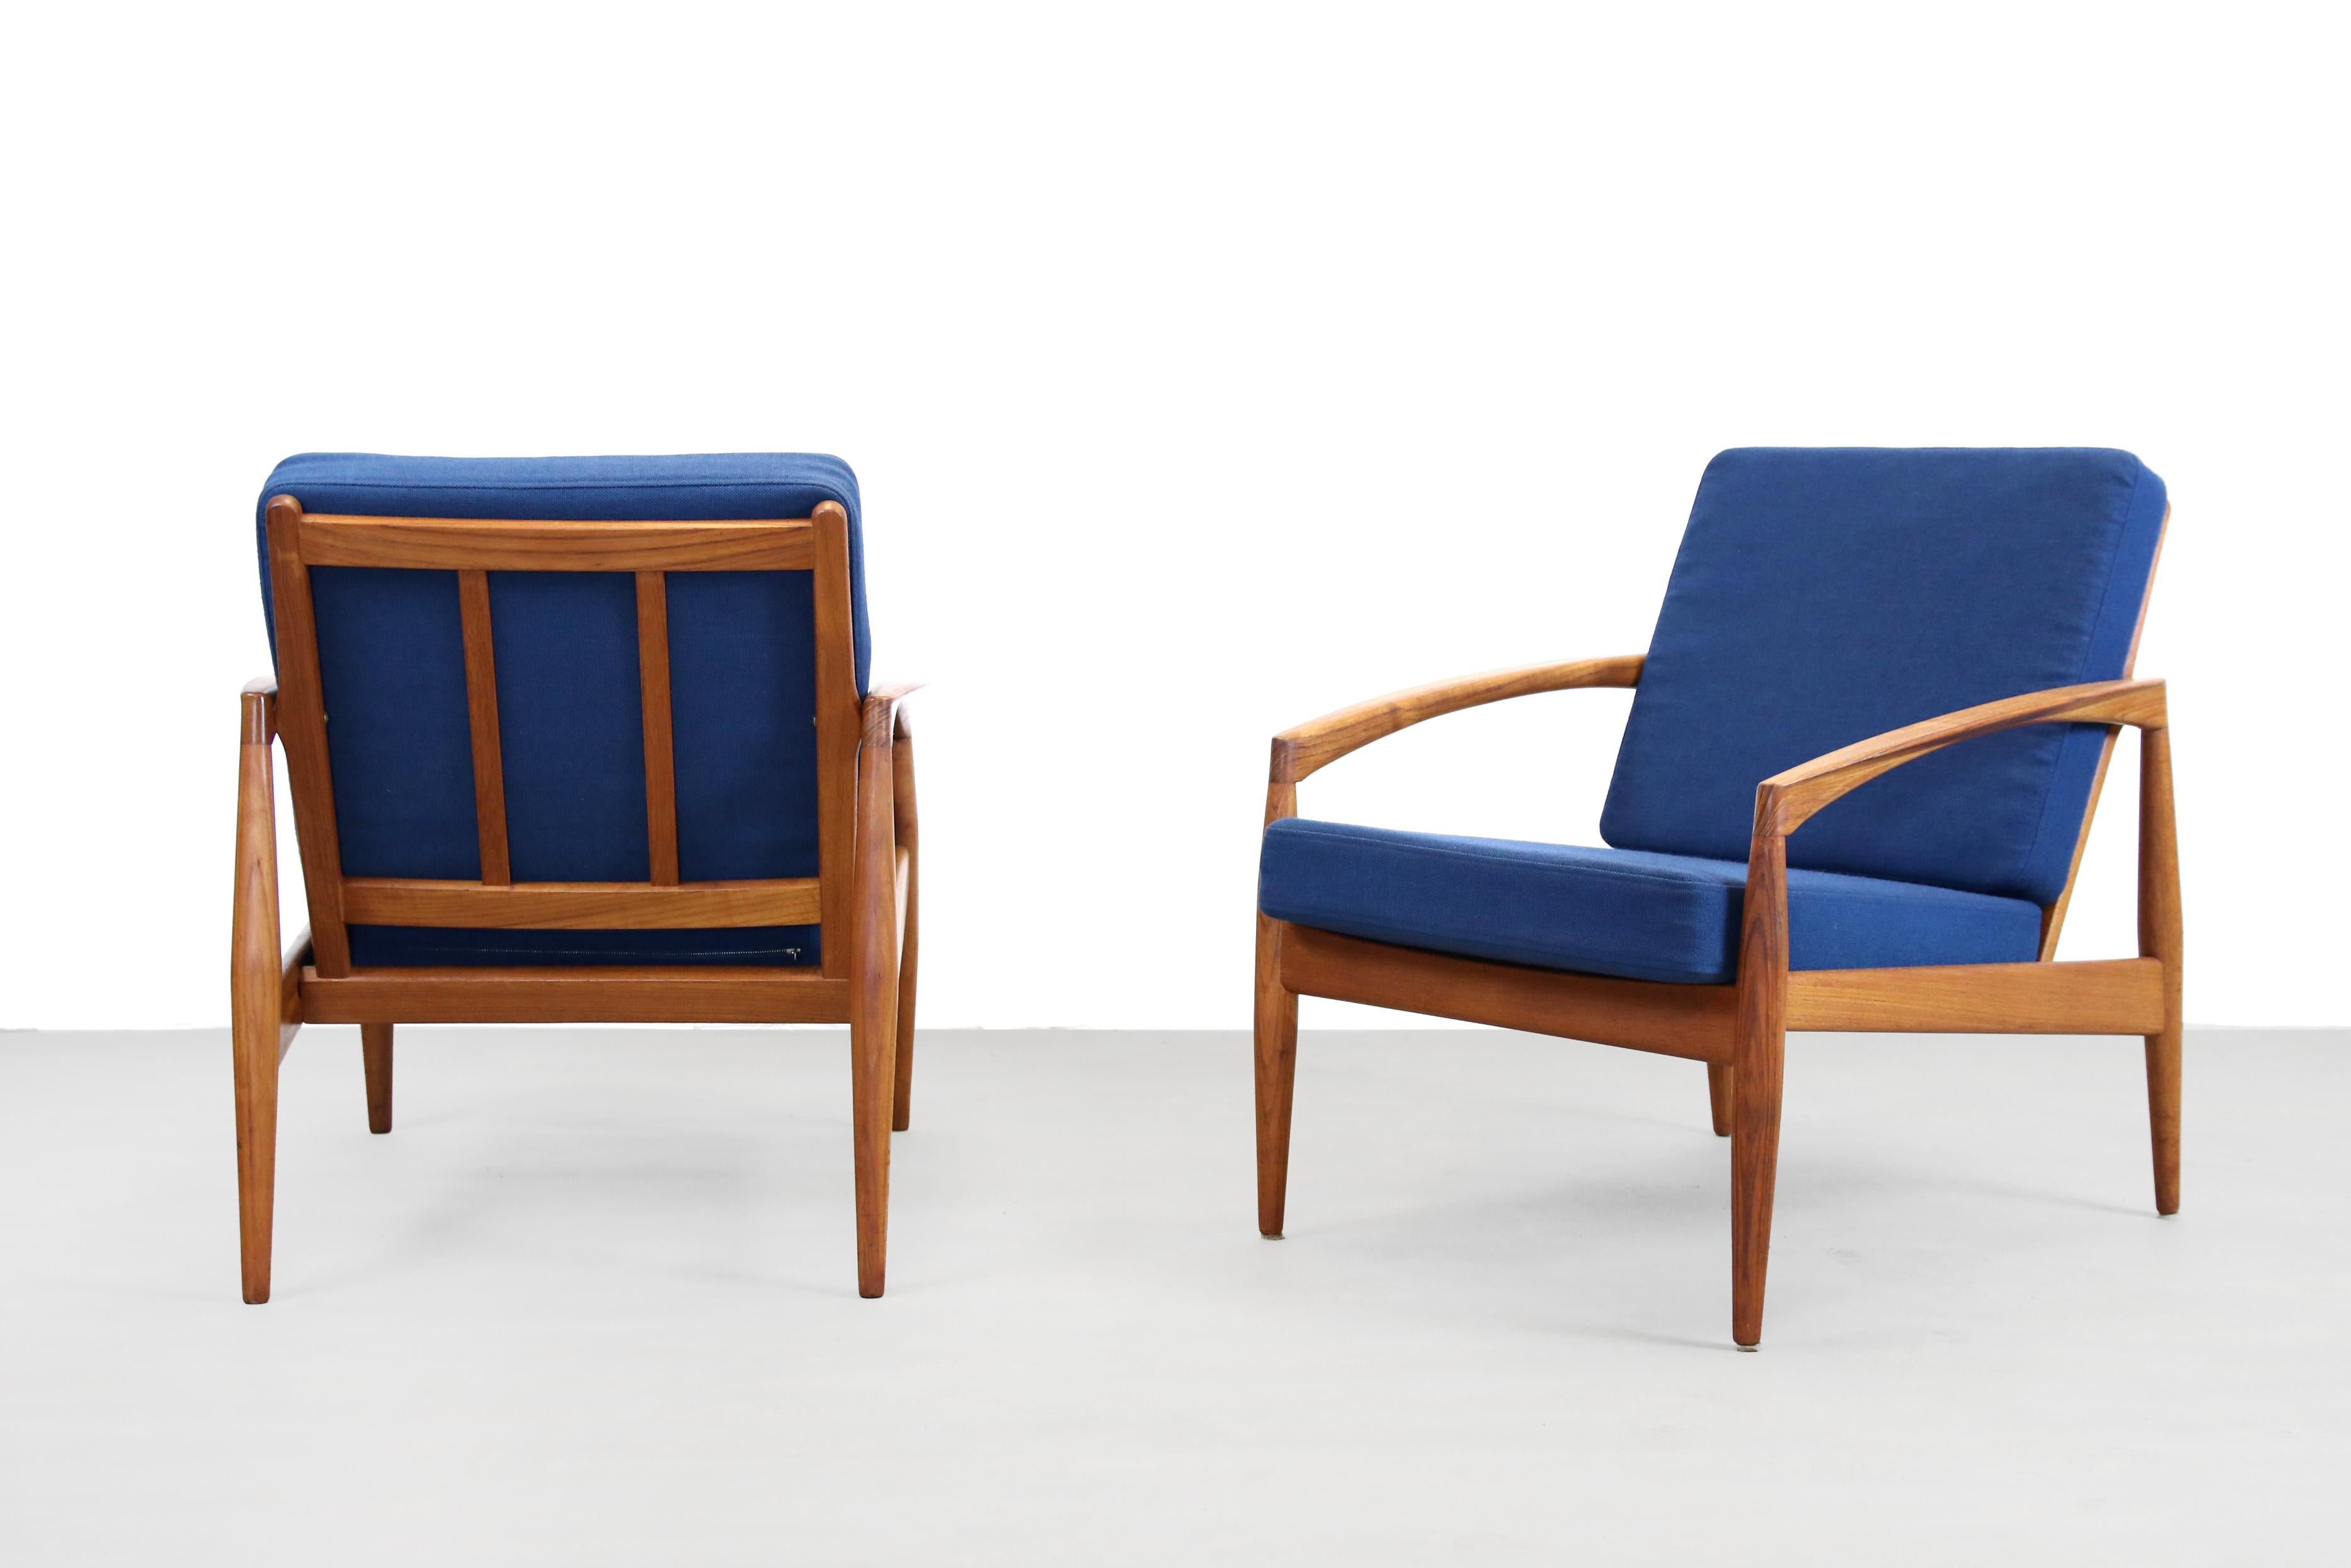 20th Century Set of Two Paper Knife Lounge Chairs by Kai Kristiansen for Magnus Olesen, 1950s